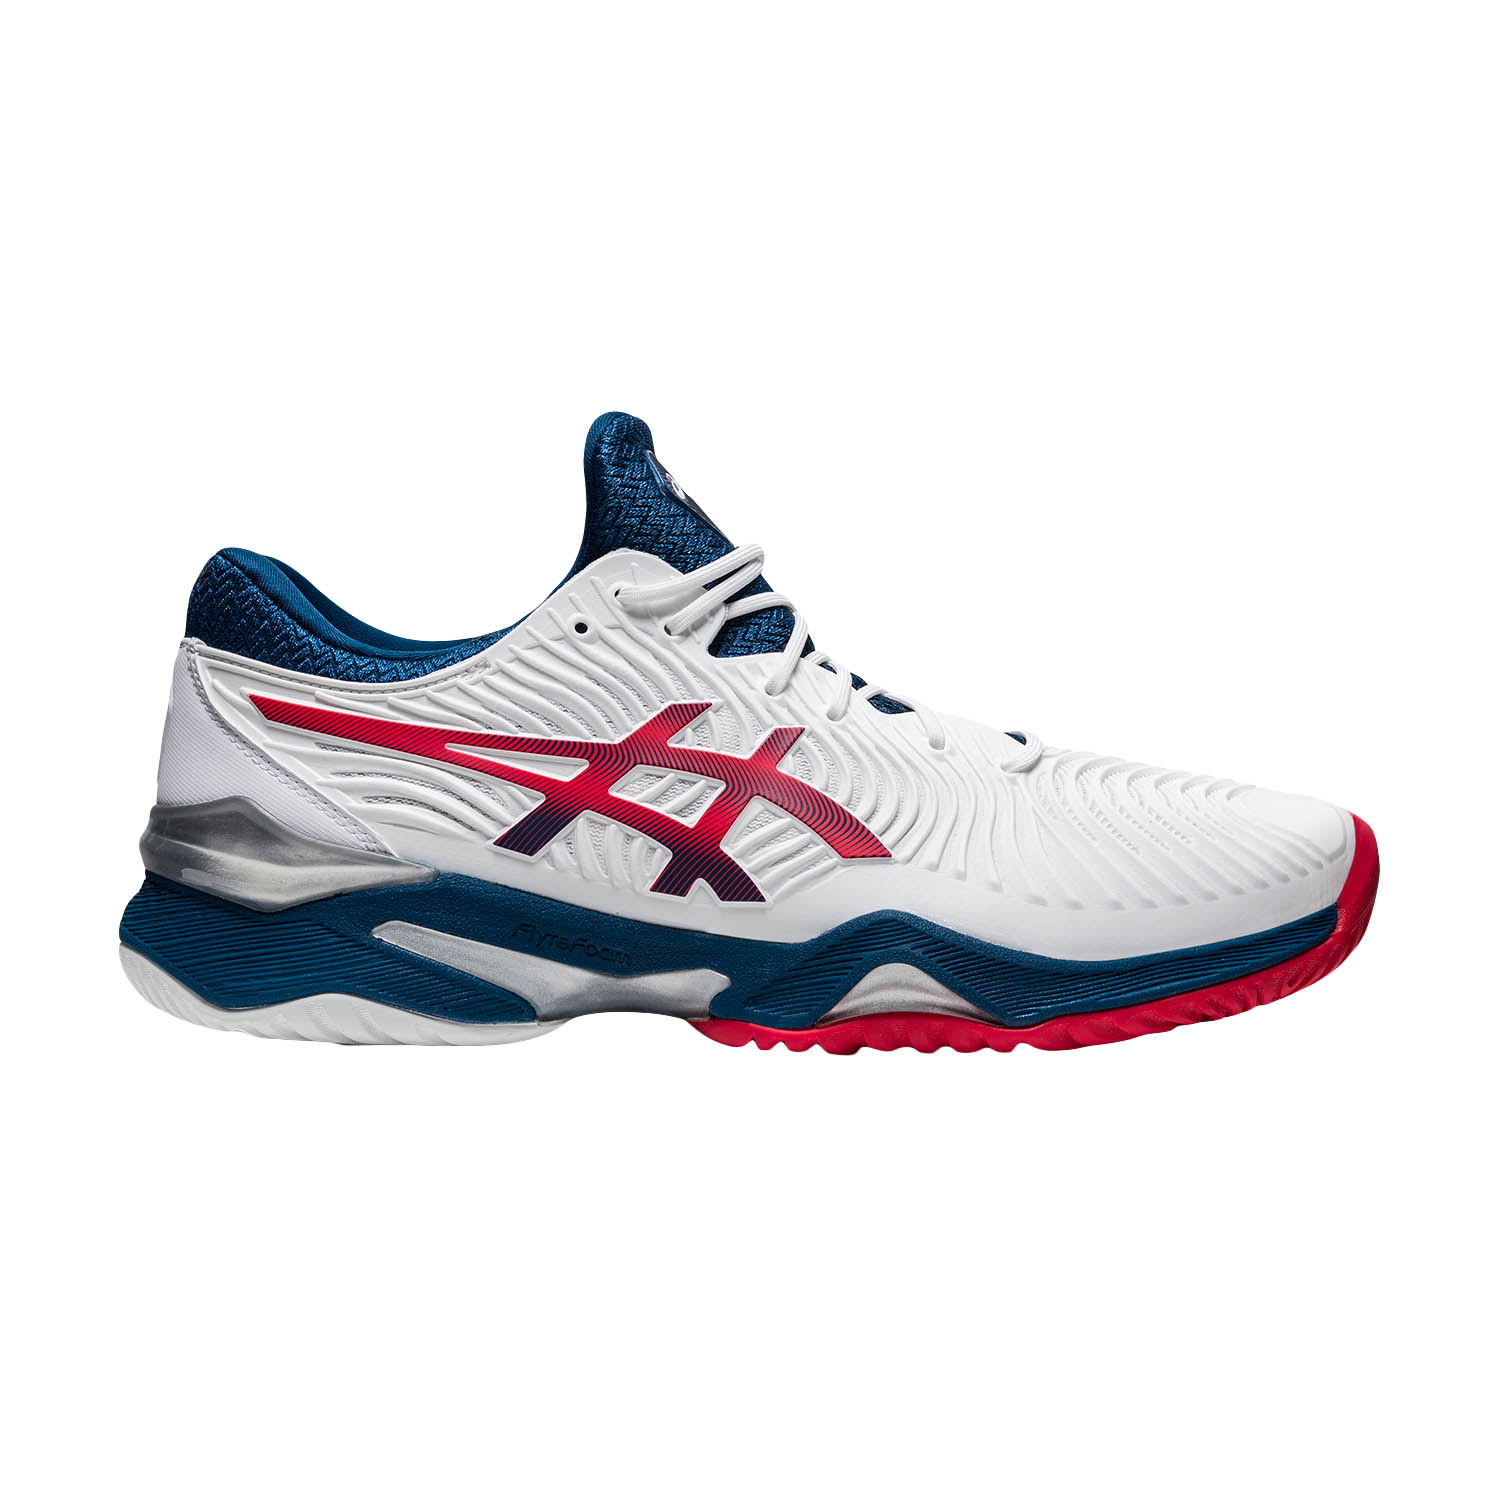 Asics Tennis Shoes Near Me Clearance, SAVE 58%.